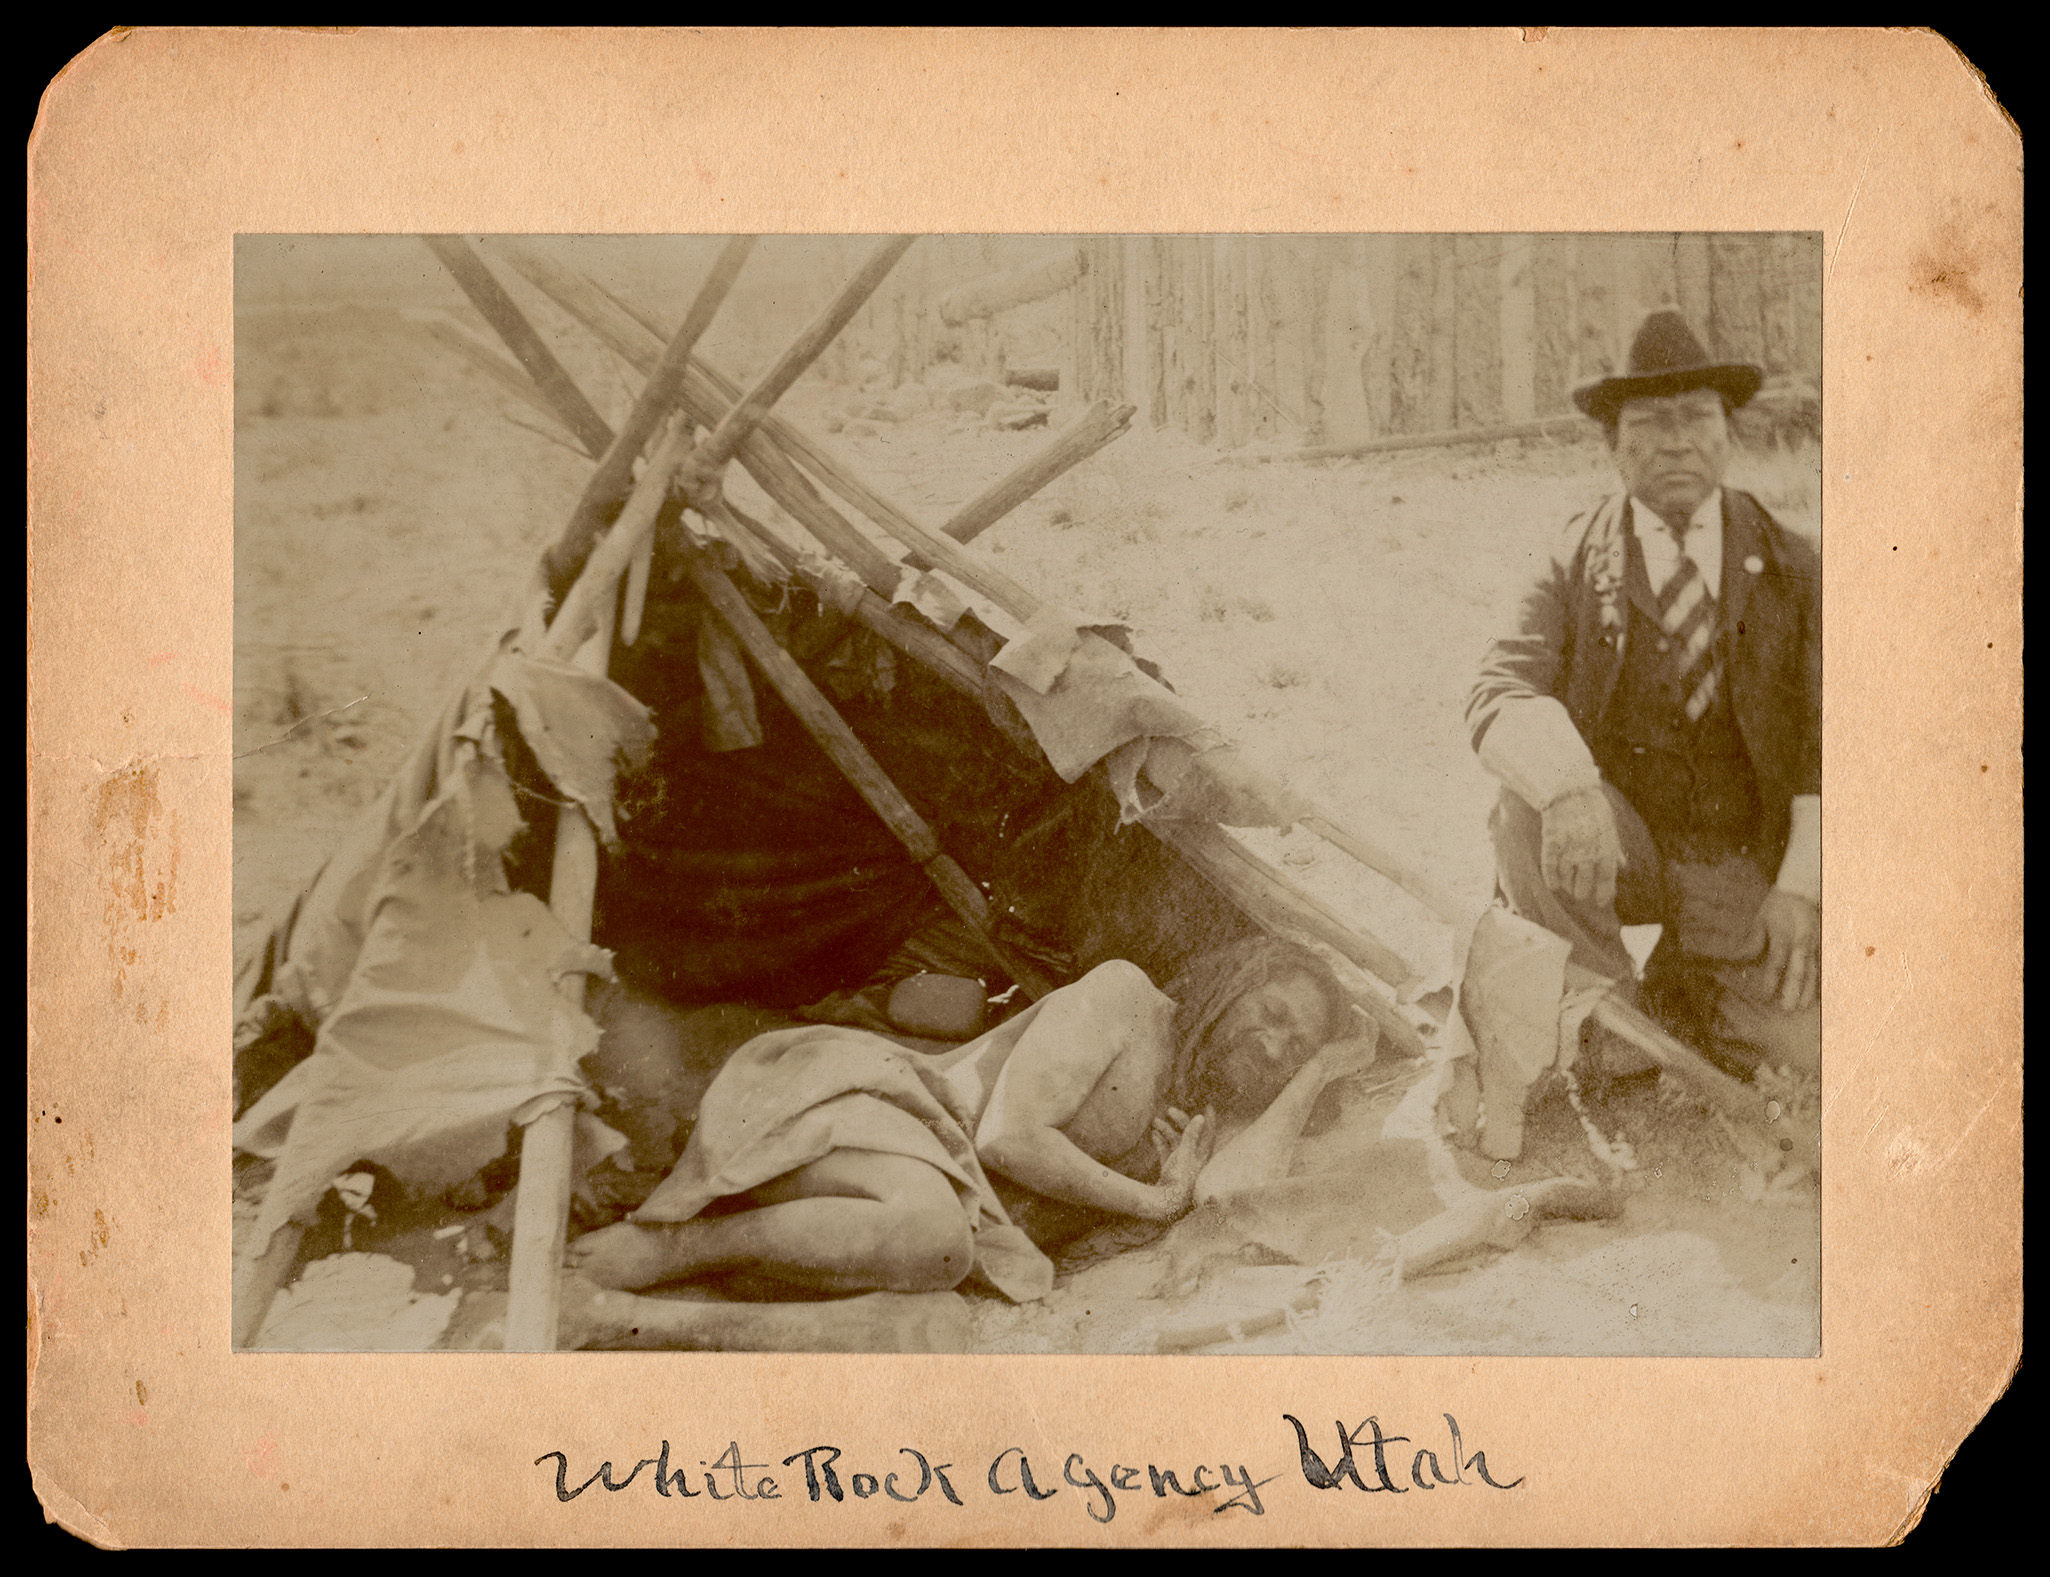 Photographic cabinet card depicting Inneputs, a Native American of the Ute people who lived reclusively in defiance of the Uintah Reservation.